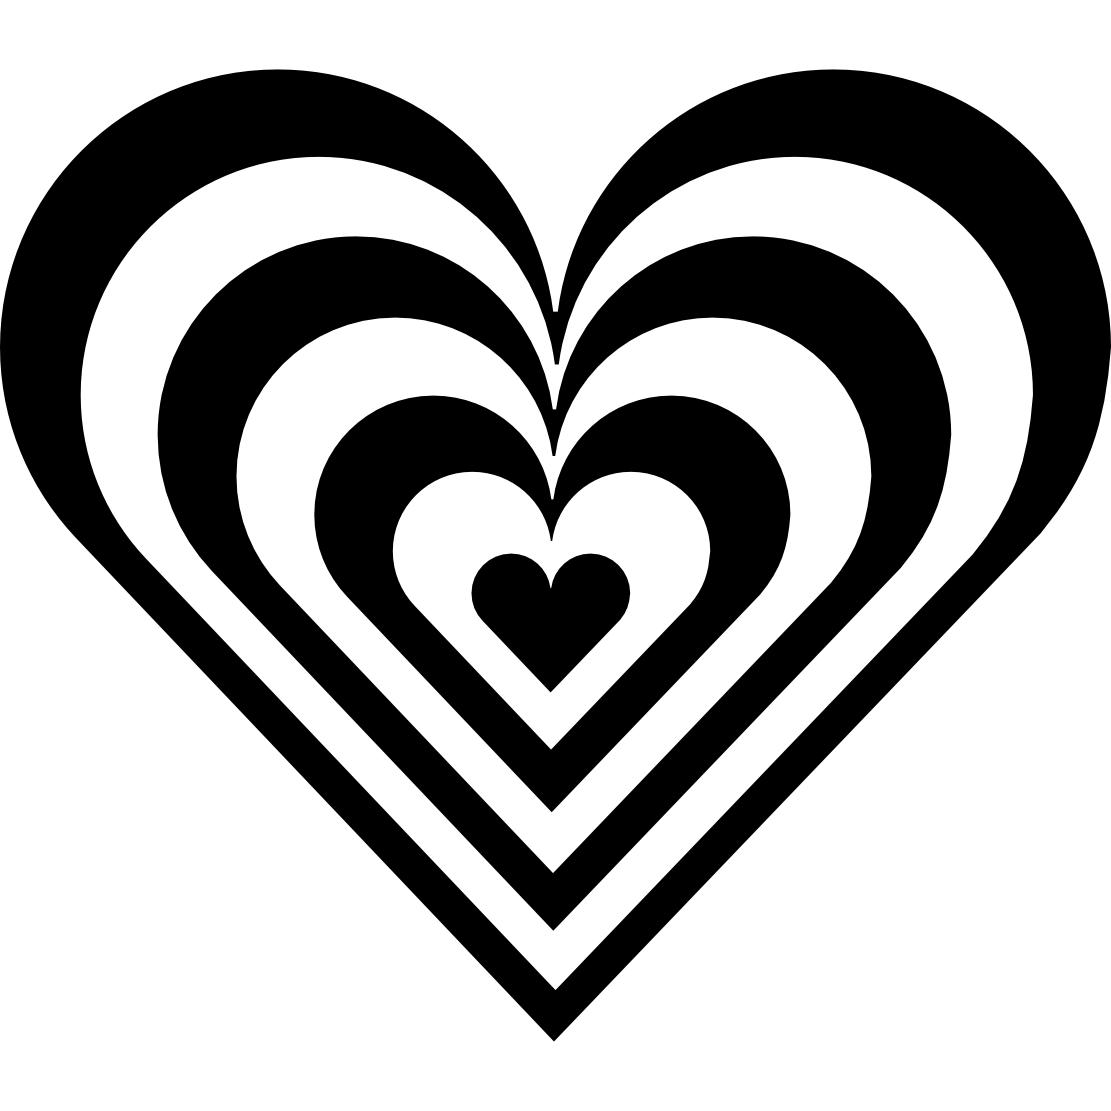 Heart Clipart Black And White - high quality clipart - wedding hearts clip art, wedding heart clipart, solid heart clipart, shamrock with heart clip art, open heart clip art, lace heart clipart, hearts clipart, hearts border clip art, heart with wings clipart, heart garland clipart, heart free clip art, heart design clip art, heart clipart white, heart clipart png, heart clip art heart clip art, heart beat clip art, hand drawn heart clipart, gold heart clip art, free clip art heart images, clip art black and white heart